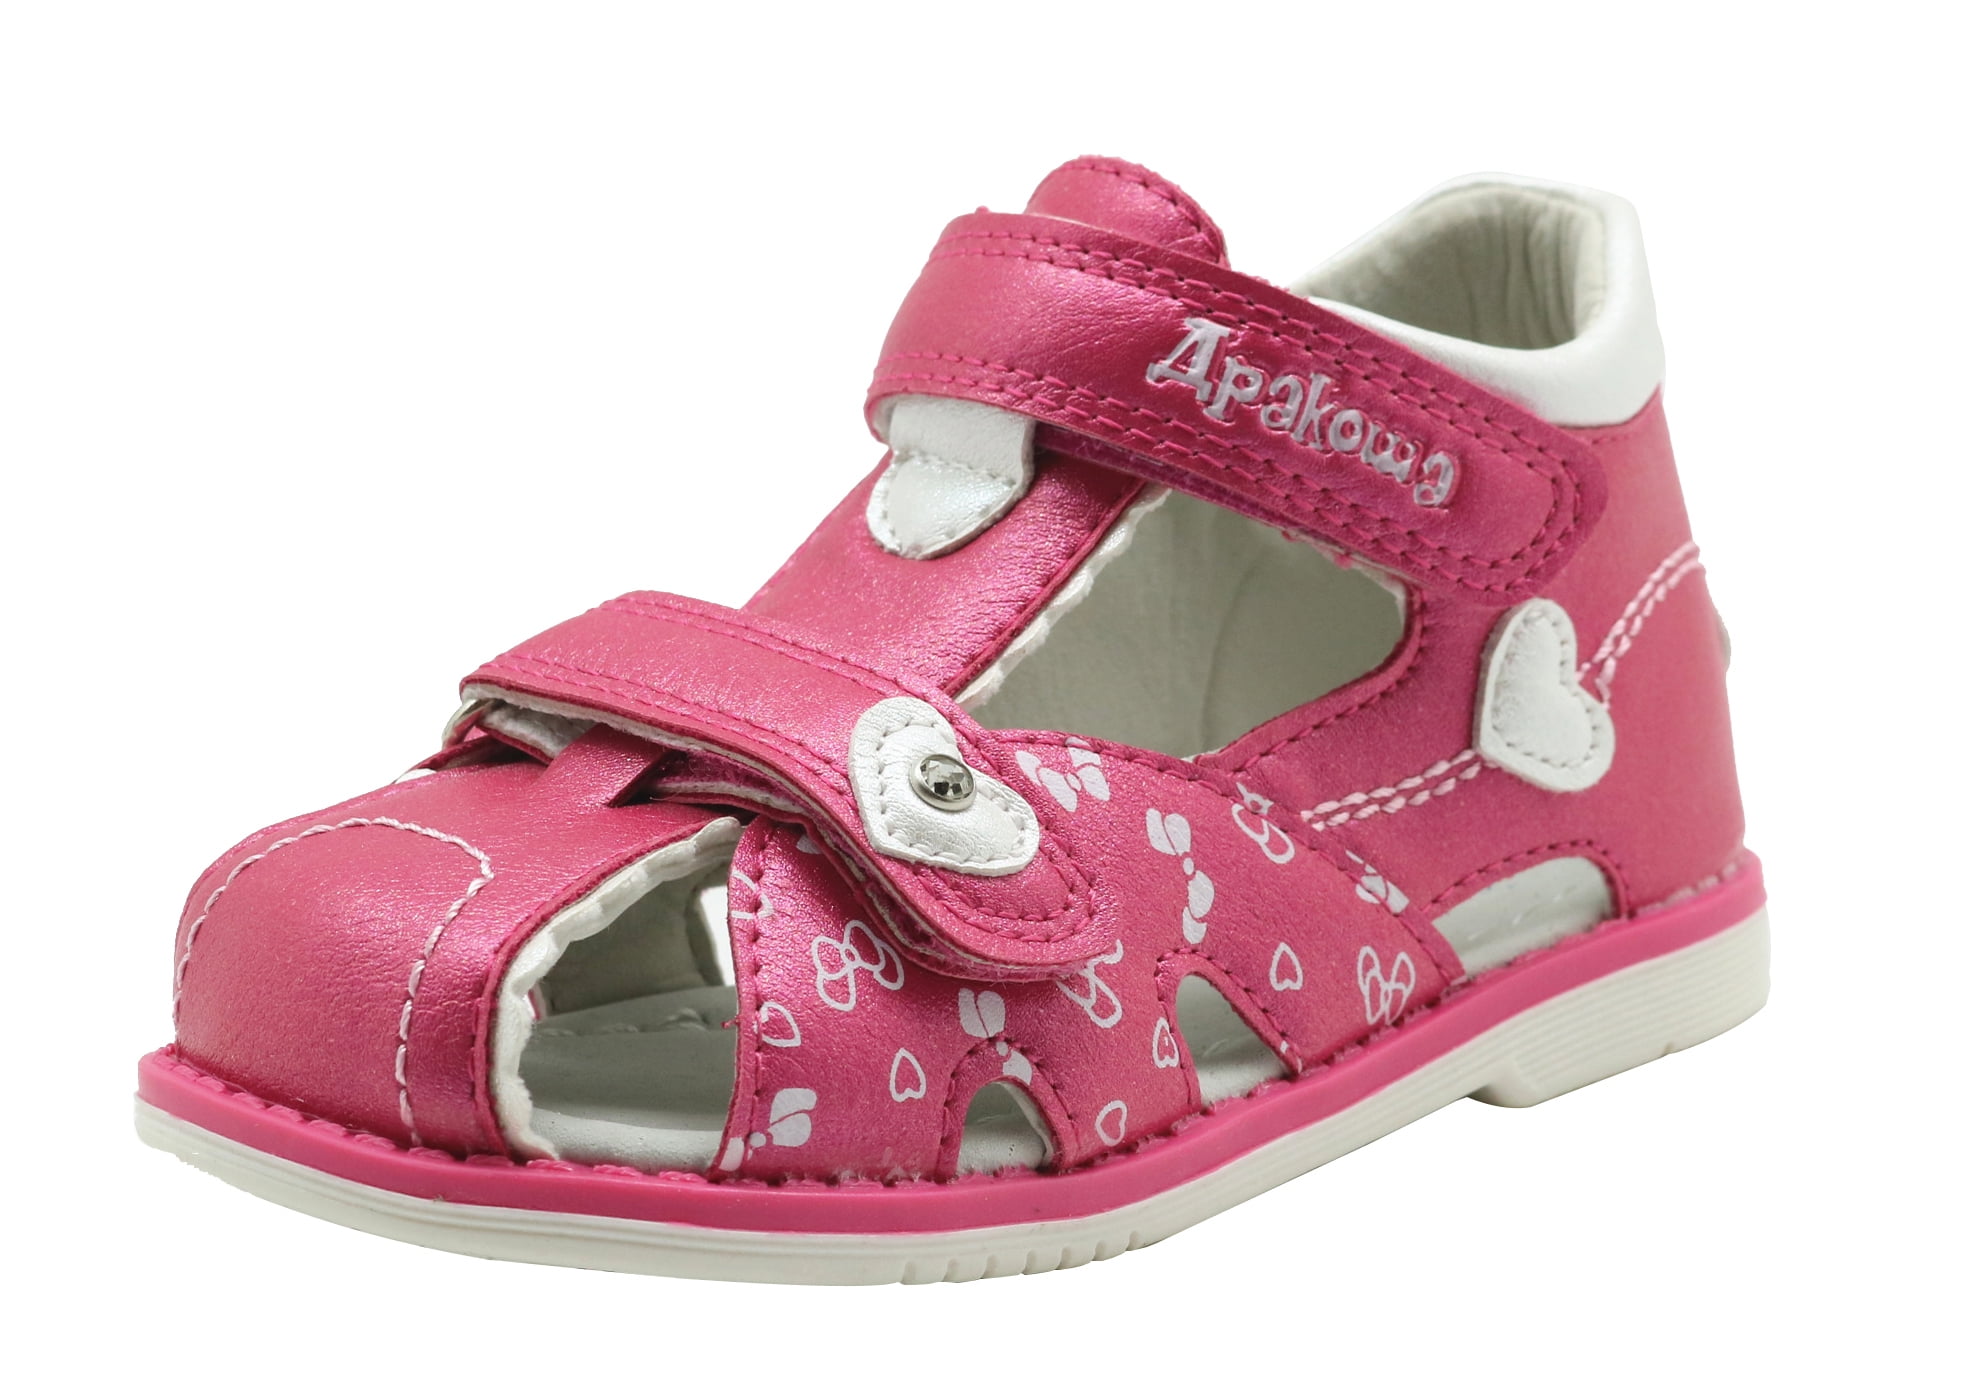 Apakowa Boys and Girls Double Adjustable Strap Closed-Toe Sandals ...